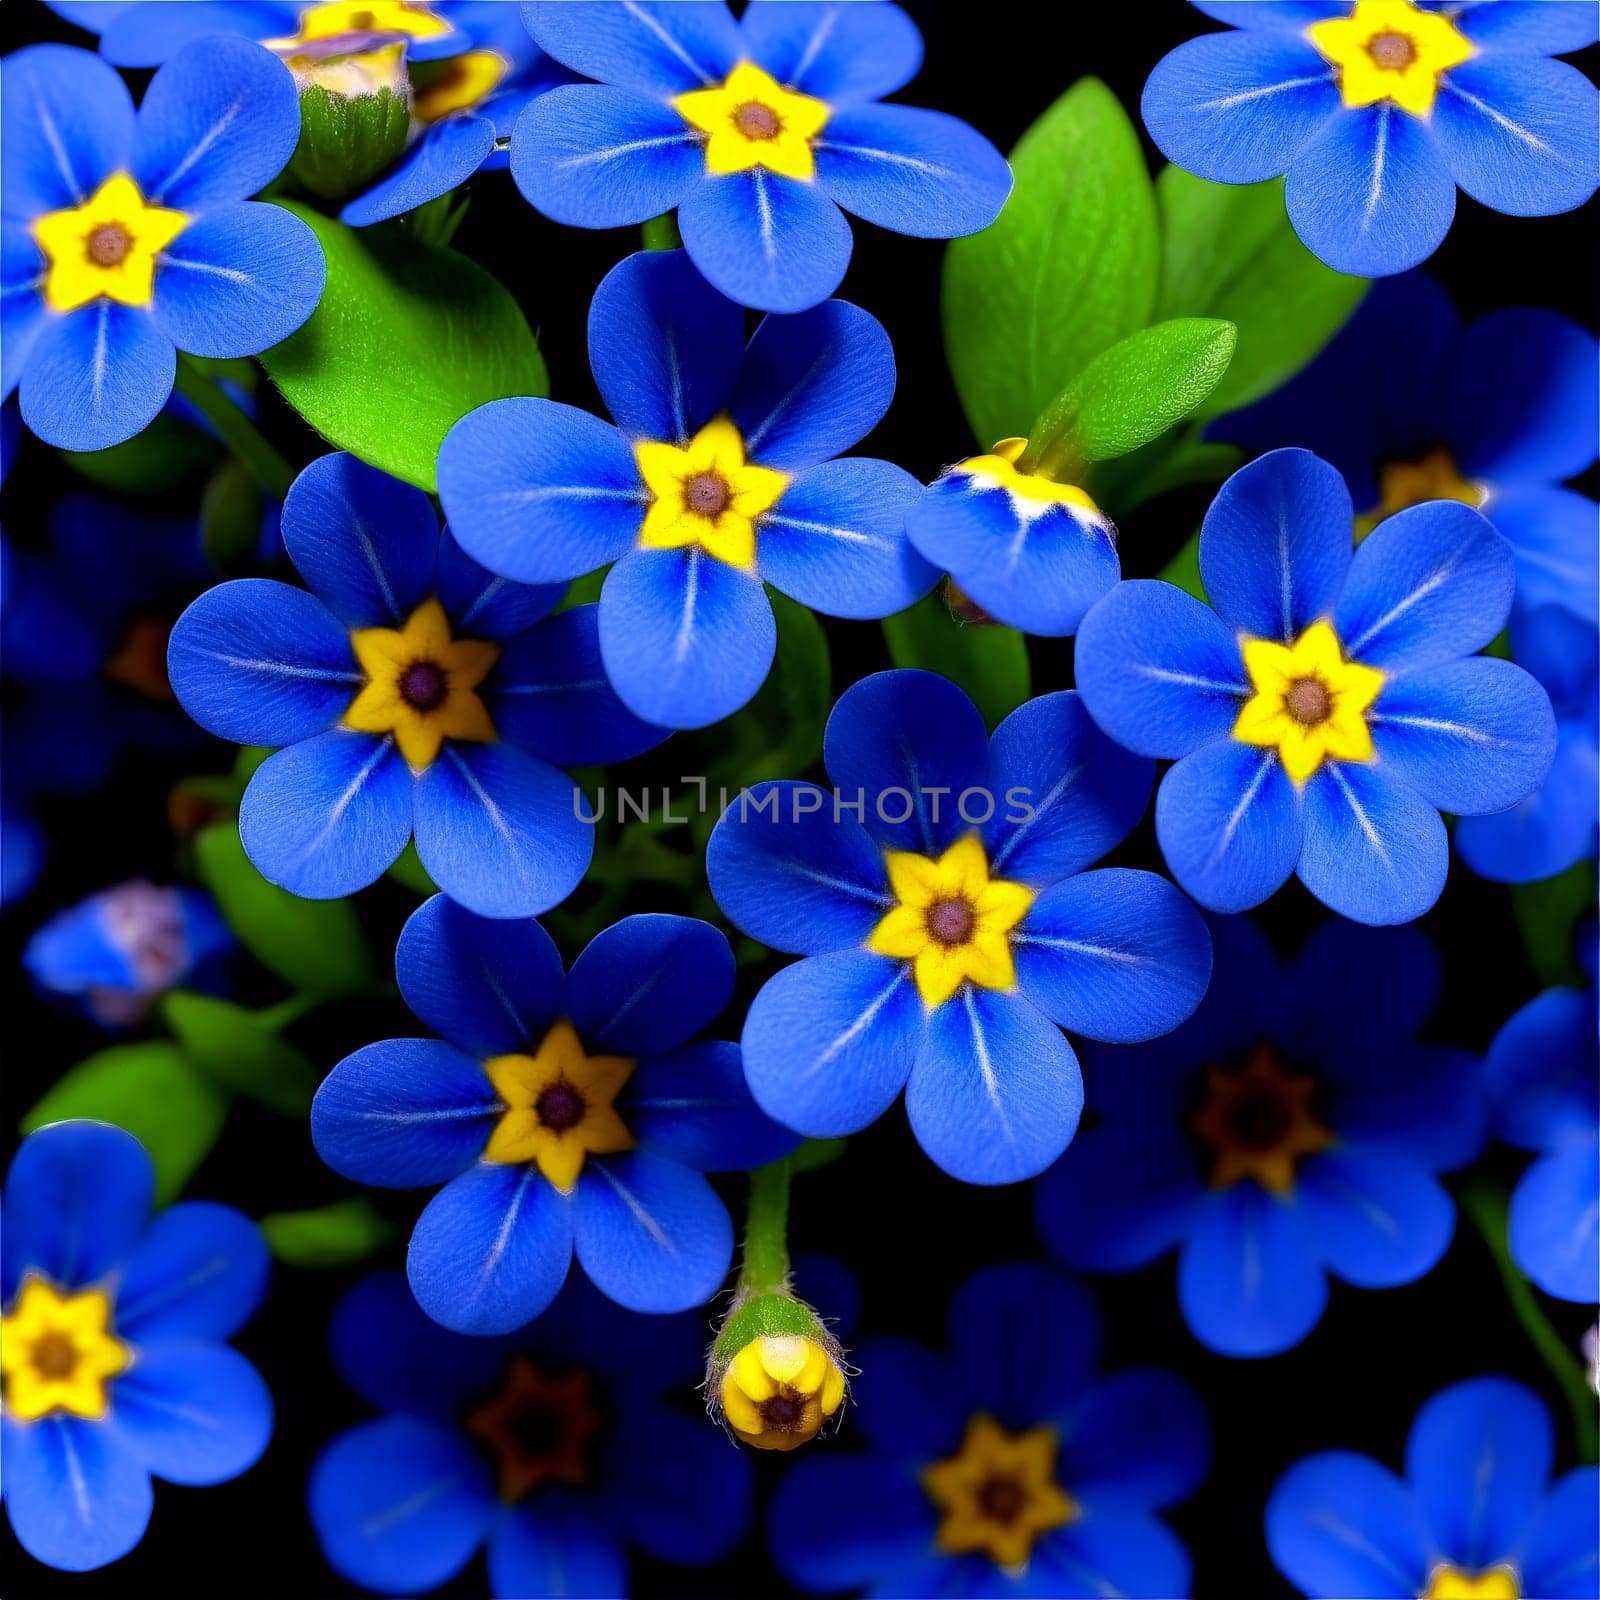 Blue forget me not small five petaled flowers in clusters yellow center Myosotis scorpioides by Matiunina